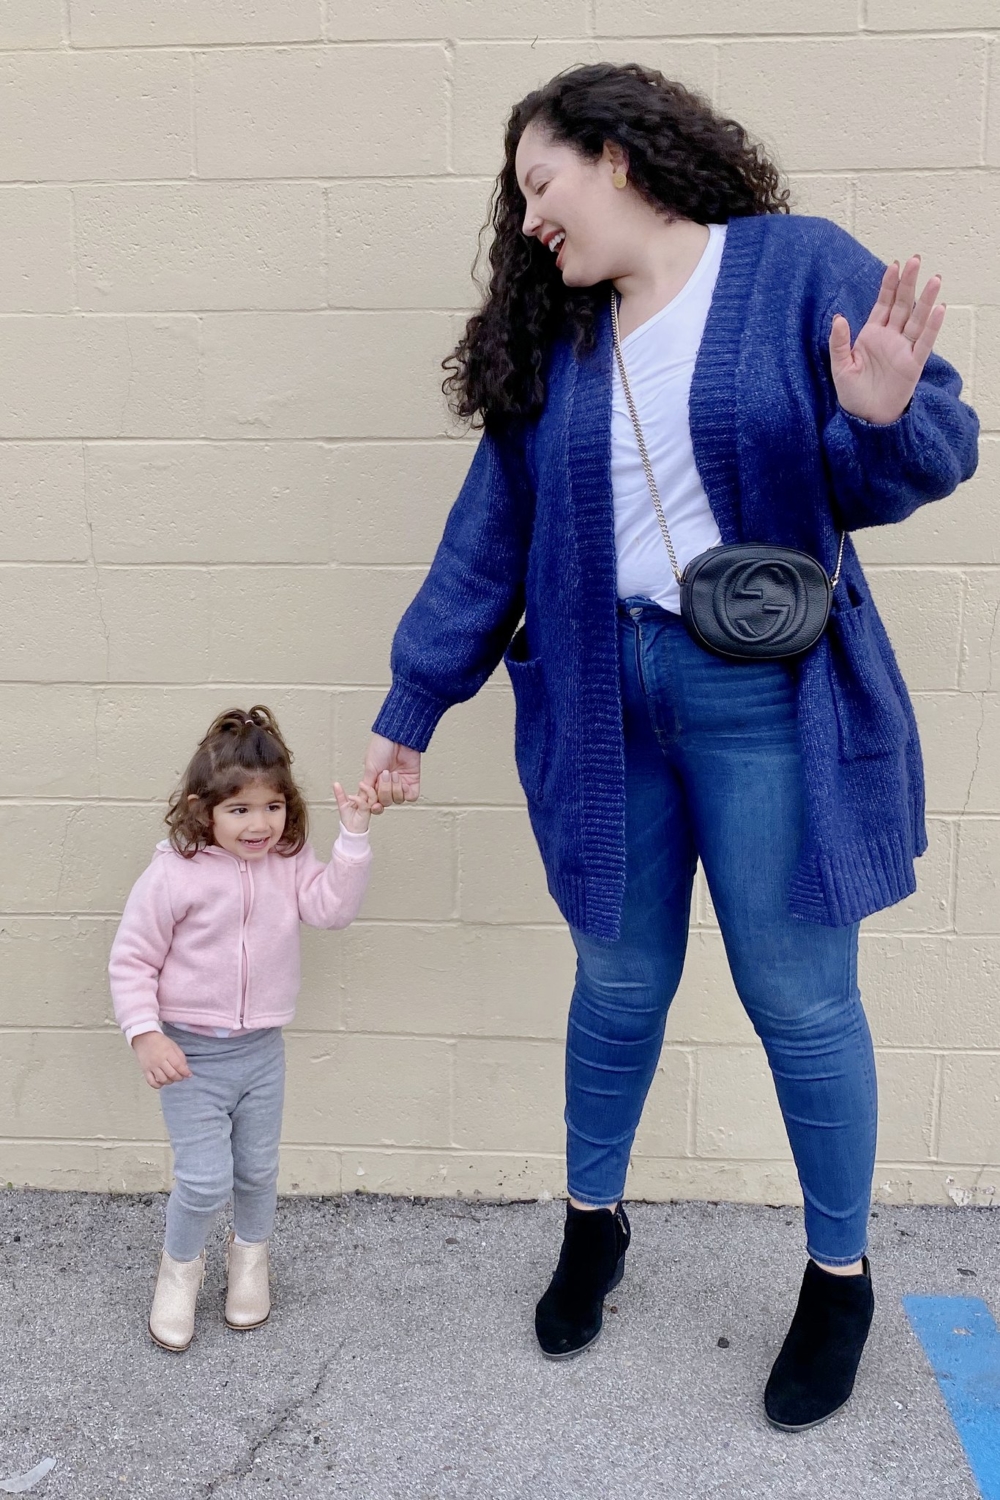 Mom Style: Casual Weekend Edition via Girl With Curves #momstyle #curvyconfidence #bodypositive #plussizefashion #curvyoutfits